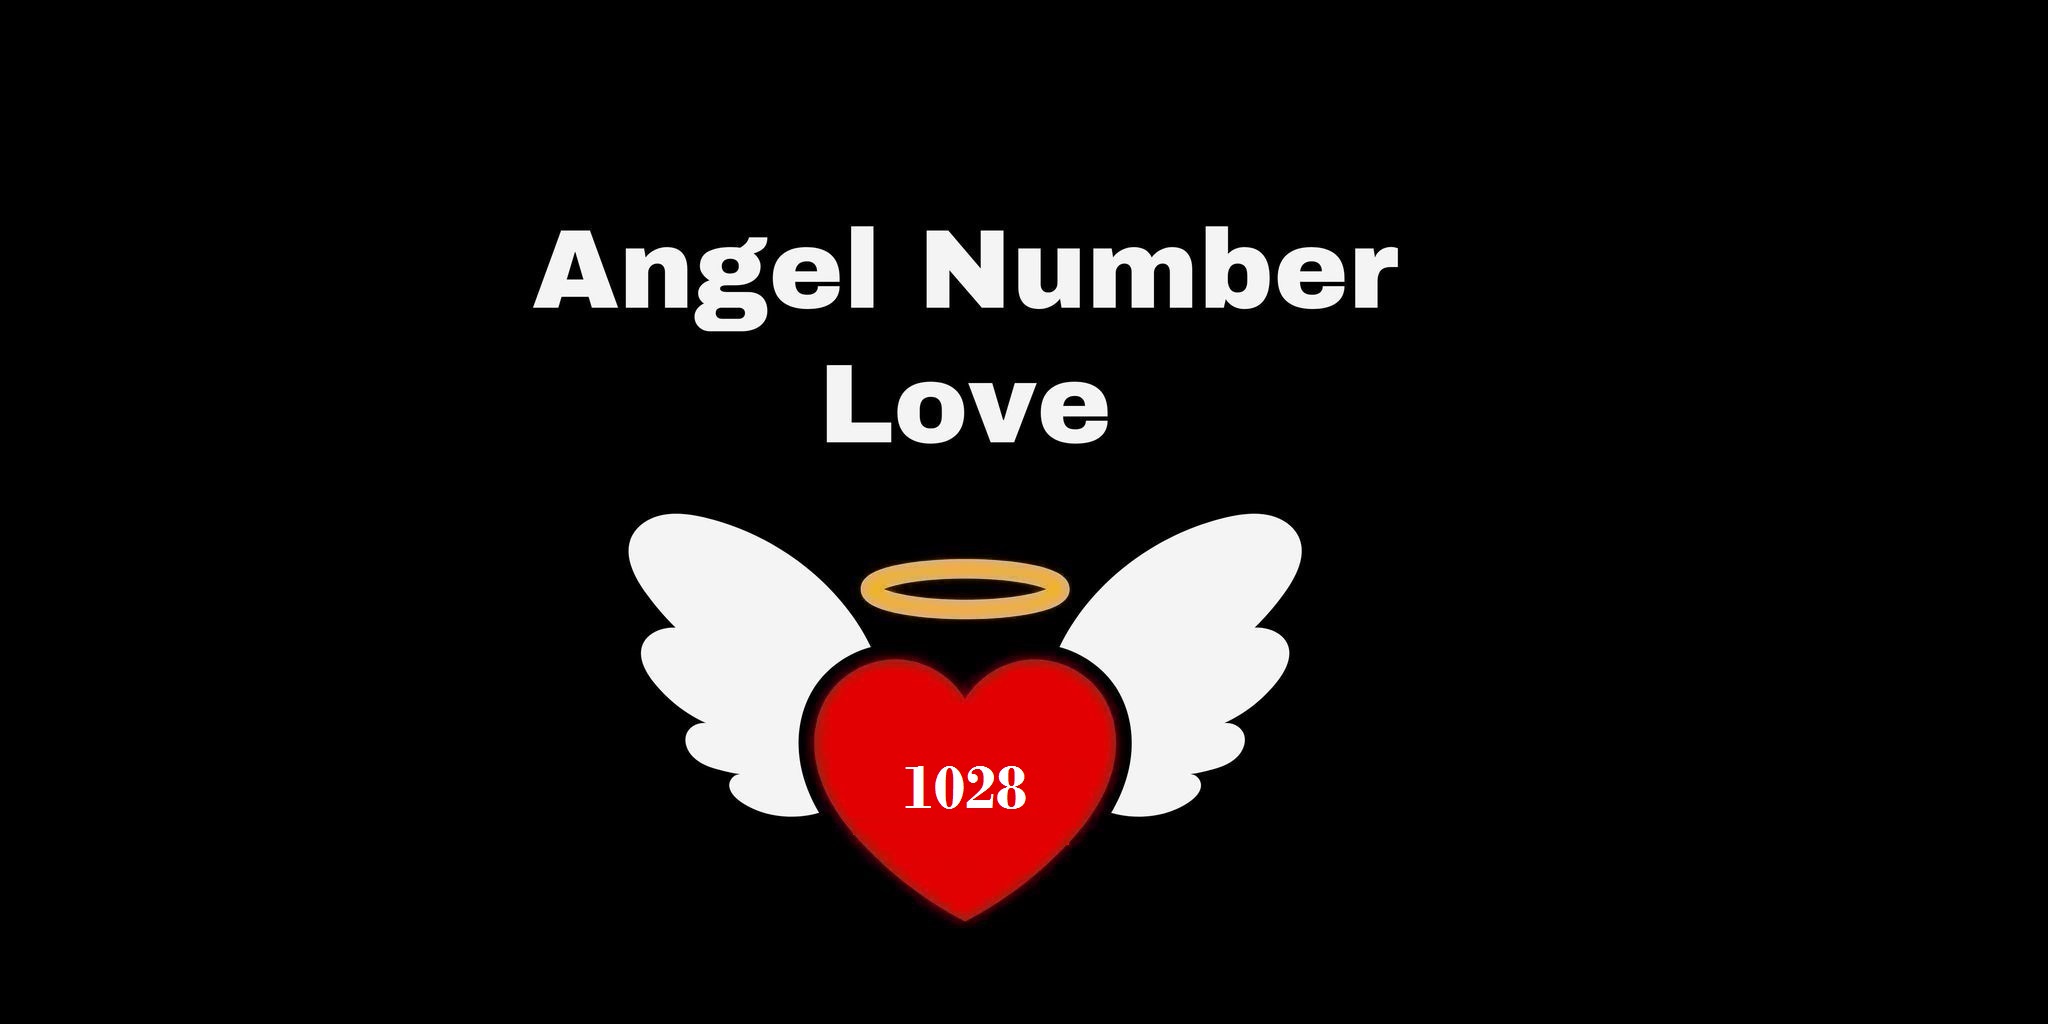 1028 Angel Number Meaning In Love